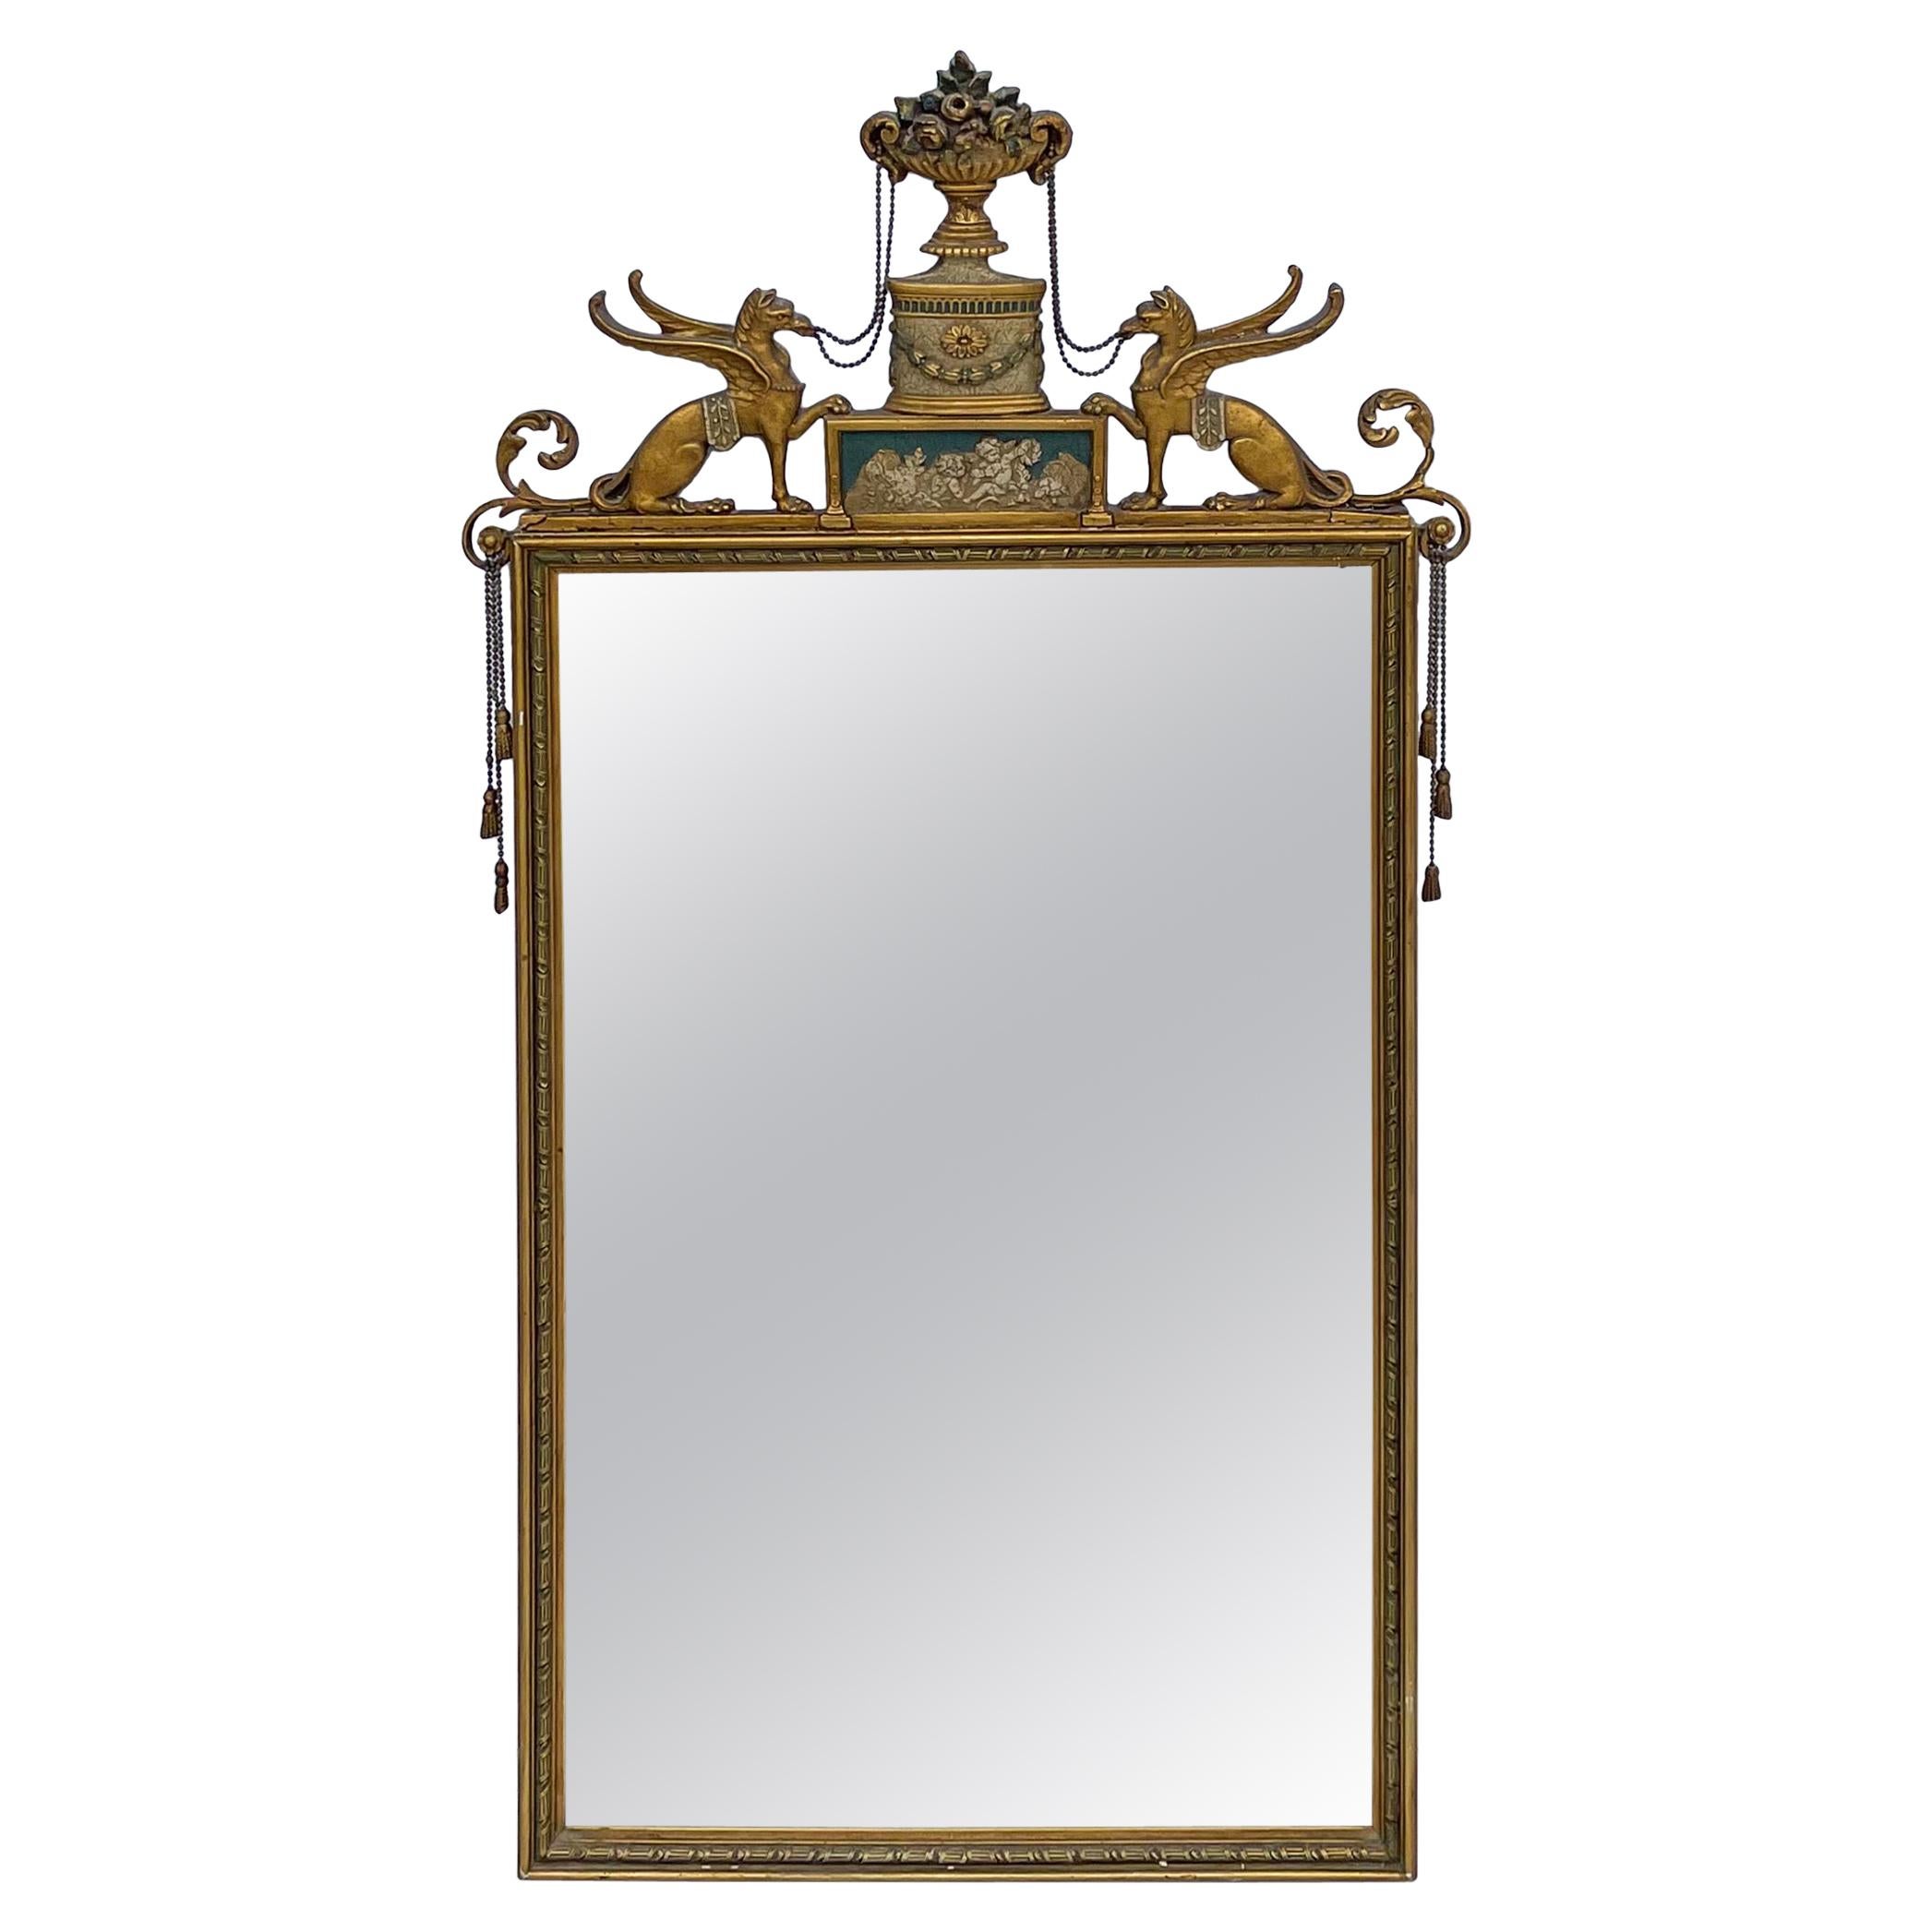 Early 20th-C Italian Neo-Classical Style Mirror with Carved Griffins